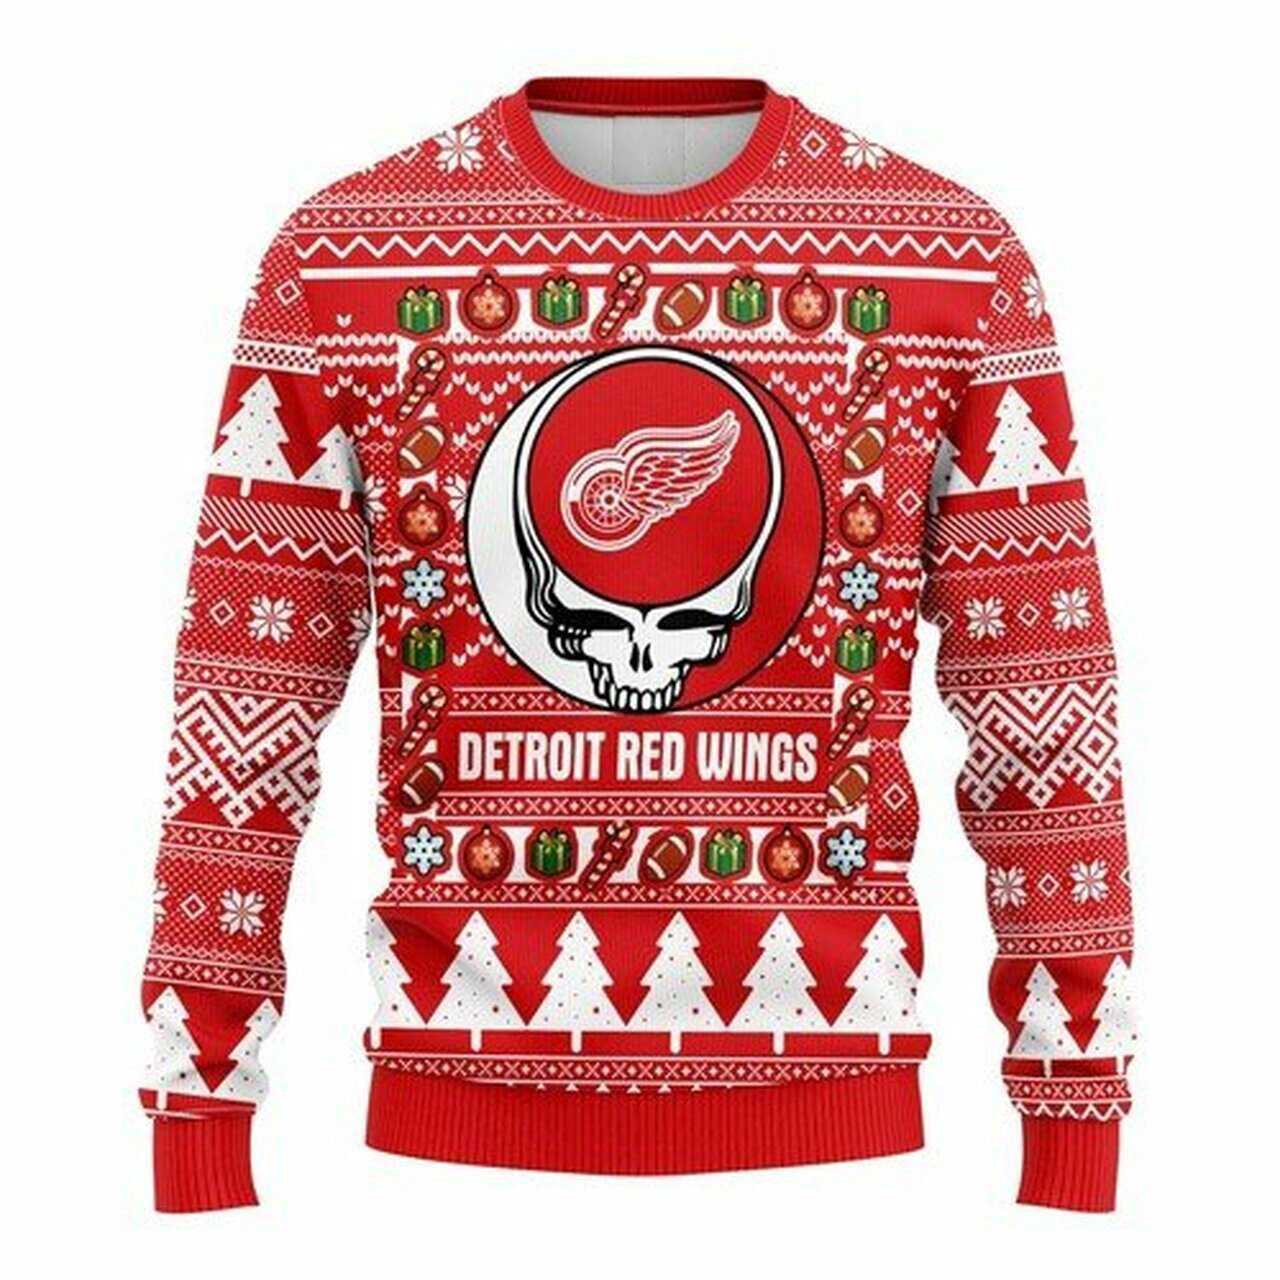 NHL Detroit Red Wings Grateful Dead ugly christmas sweater